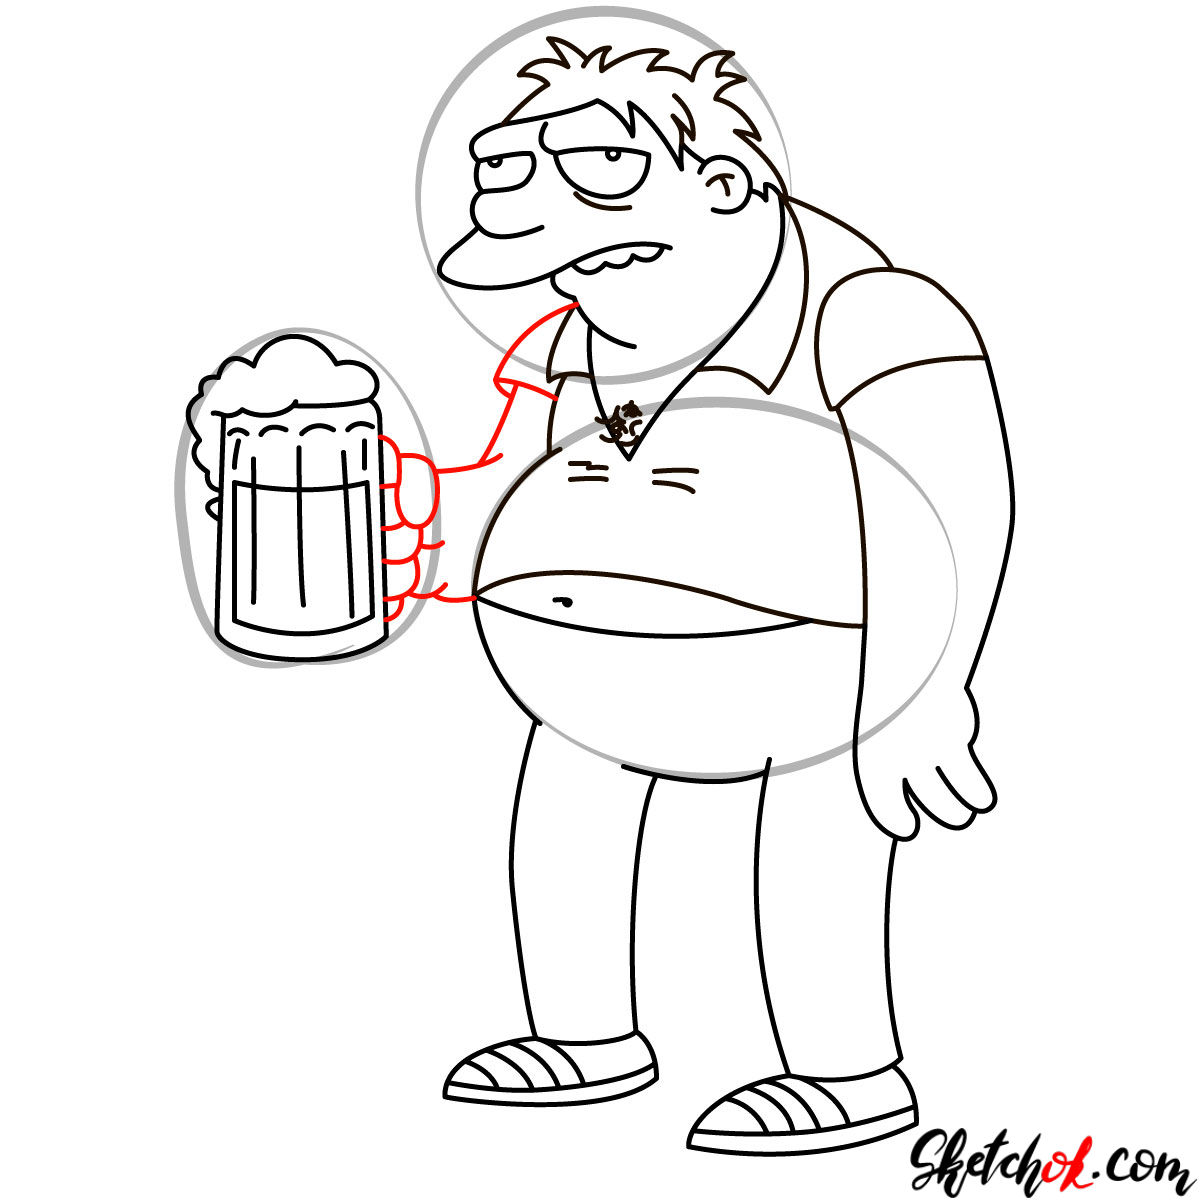 How to draw Barney with a cup of beer - step 12